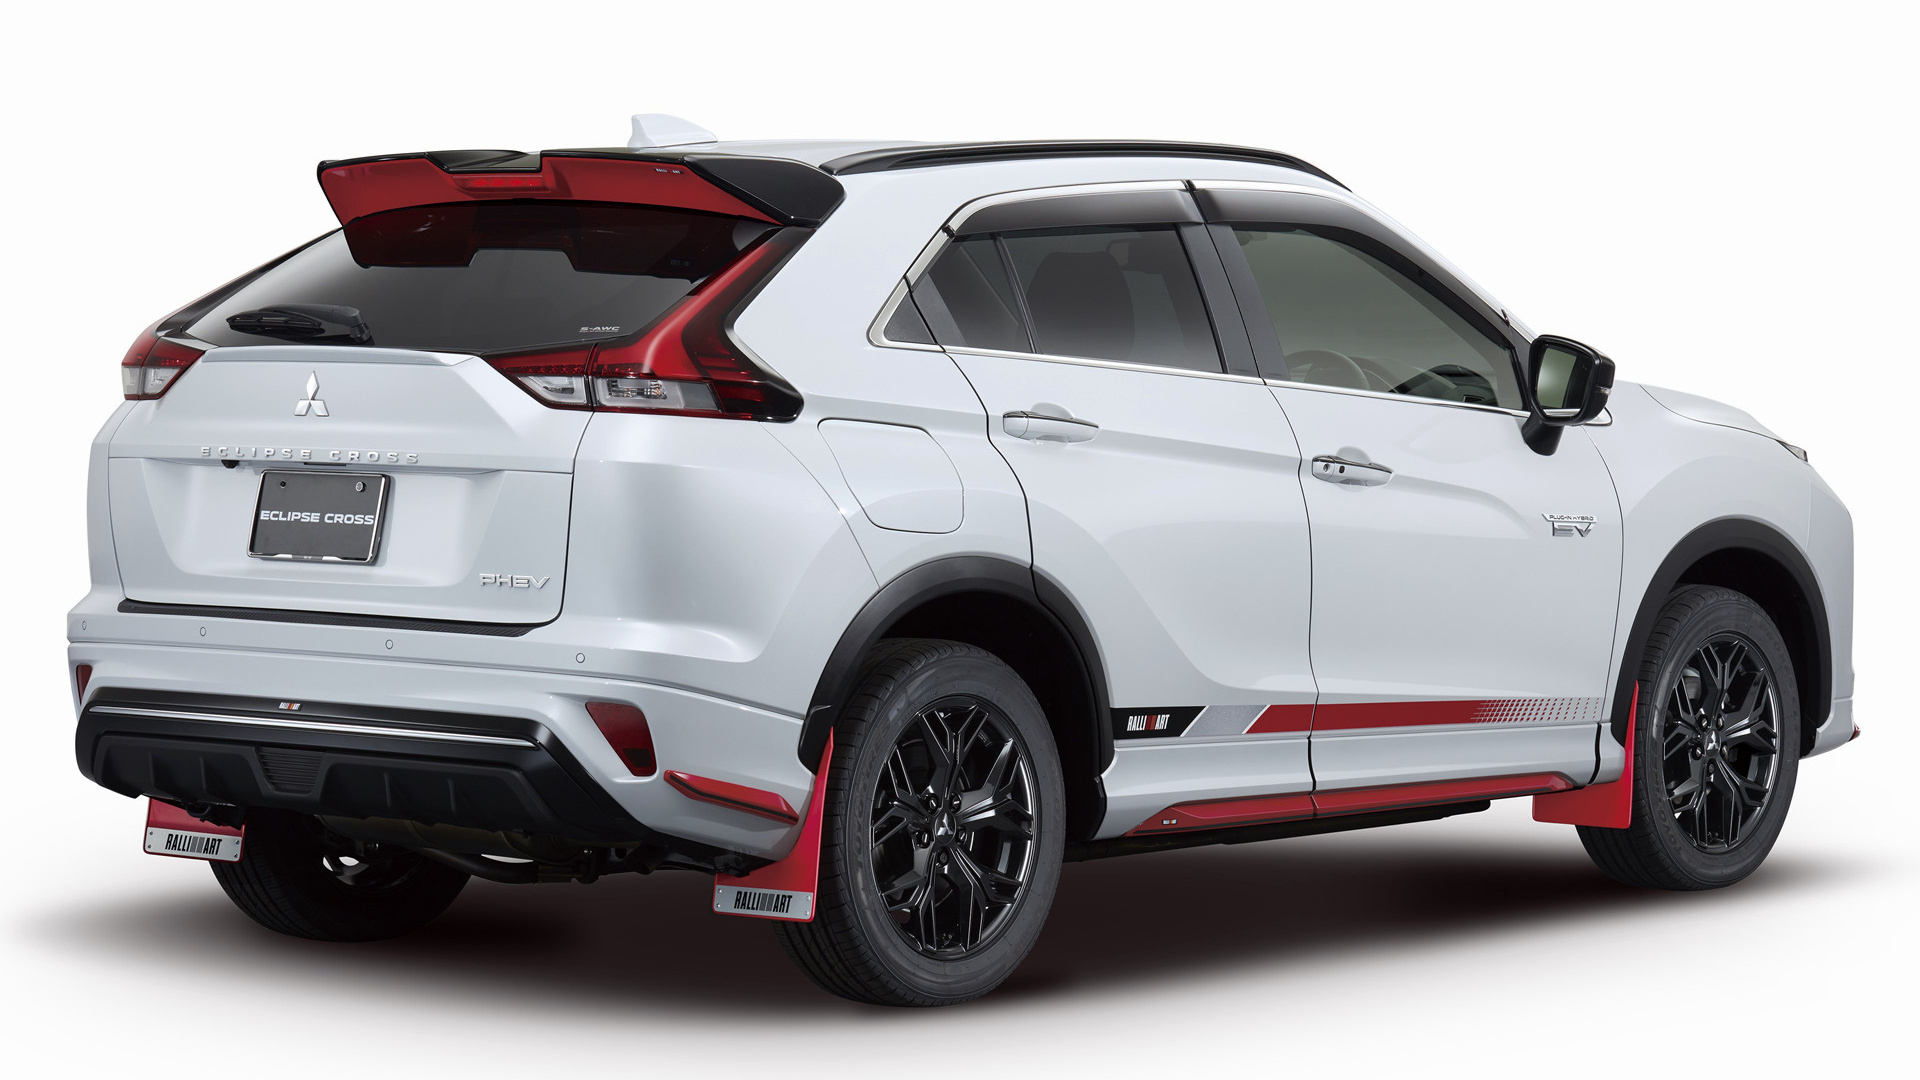 Mitsubishi Eclipse Cross, PHEV Ralliart style, Wallpapers, HD images, 1920x1080 Full HD Desktop